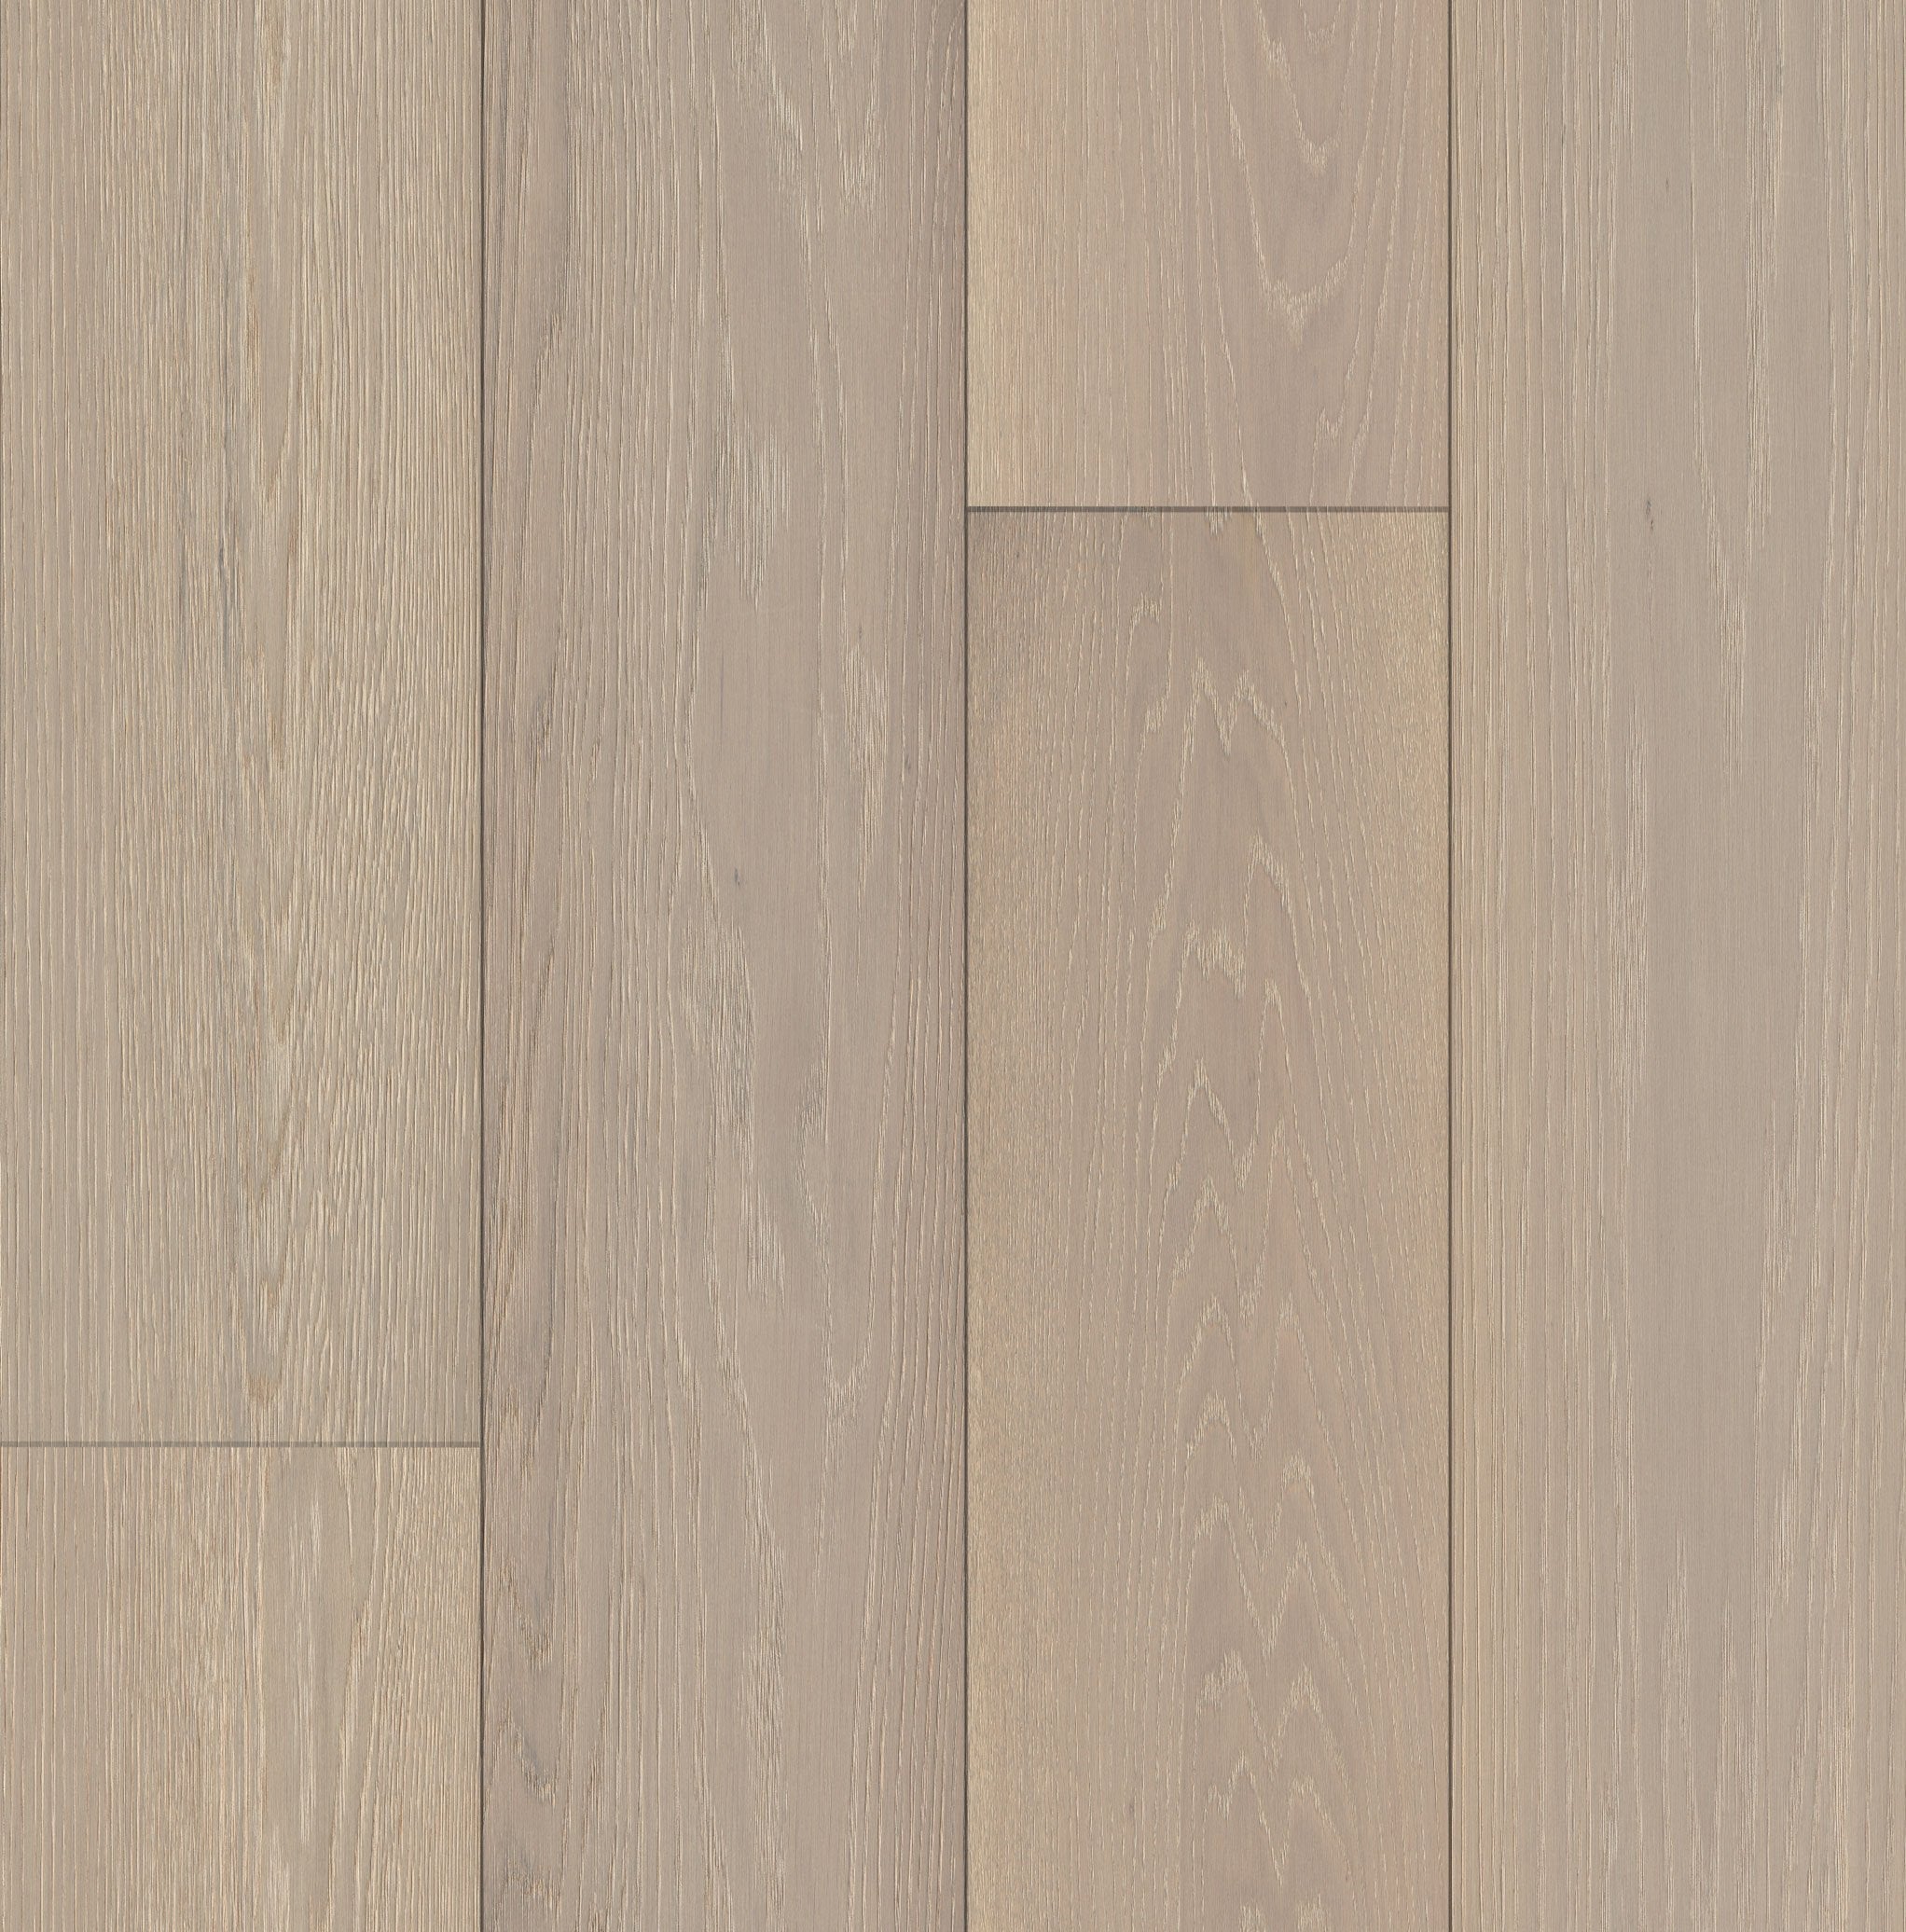 teka colonial hartford german french white oak natural hardwood flooring plank stained white grey distributed by surface group international